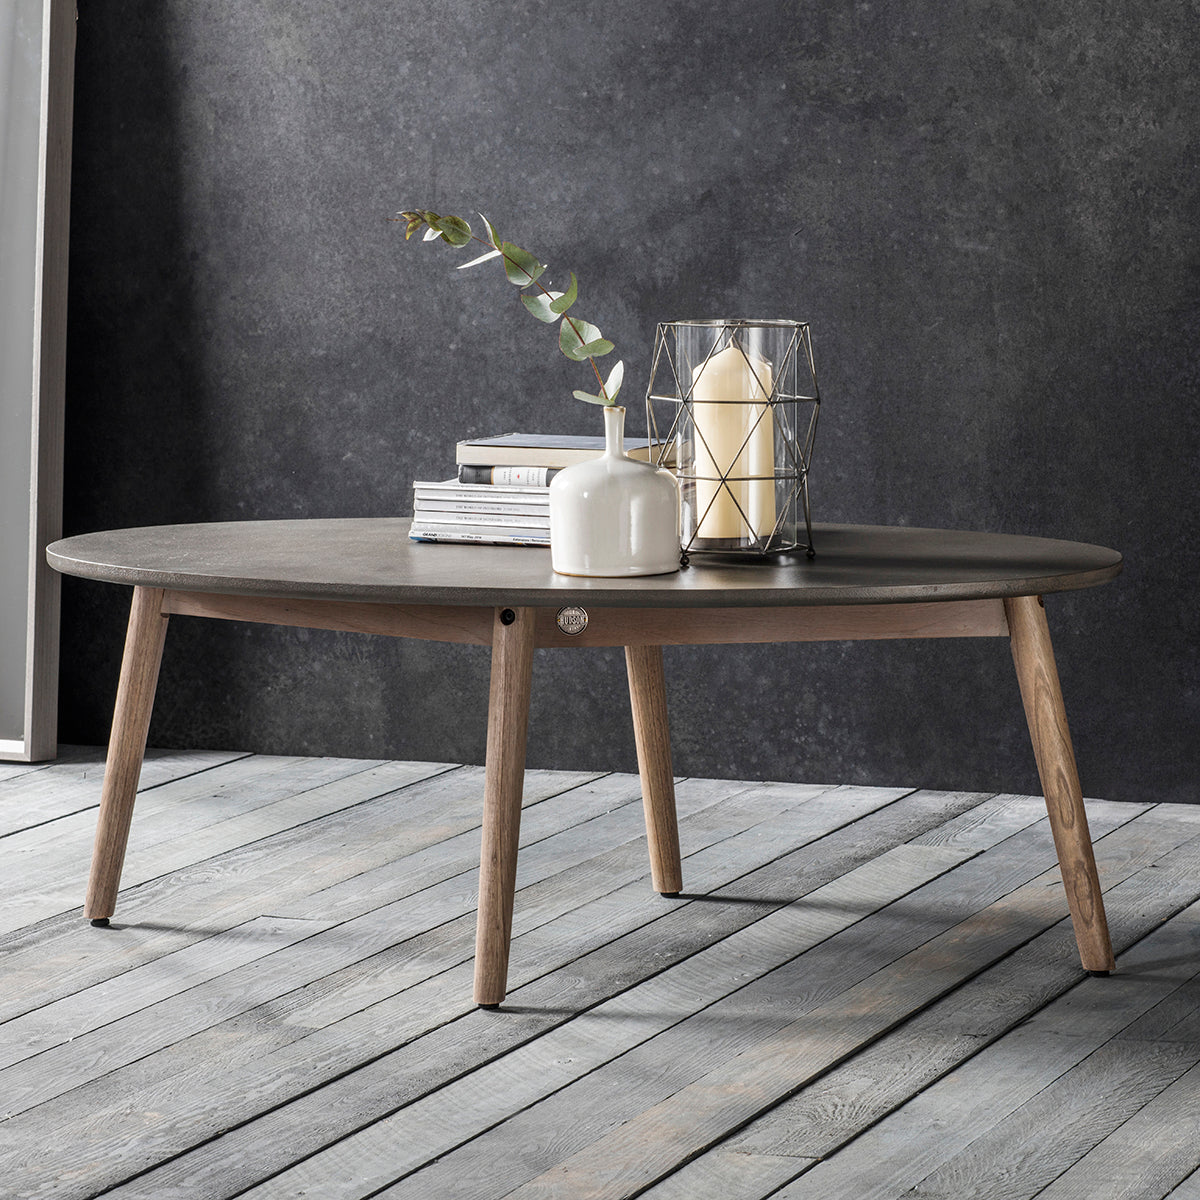 A Kikiathome.co.uk oval coffee table placed on a wooden floor as part of interior decor/home furniture.